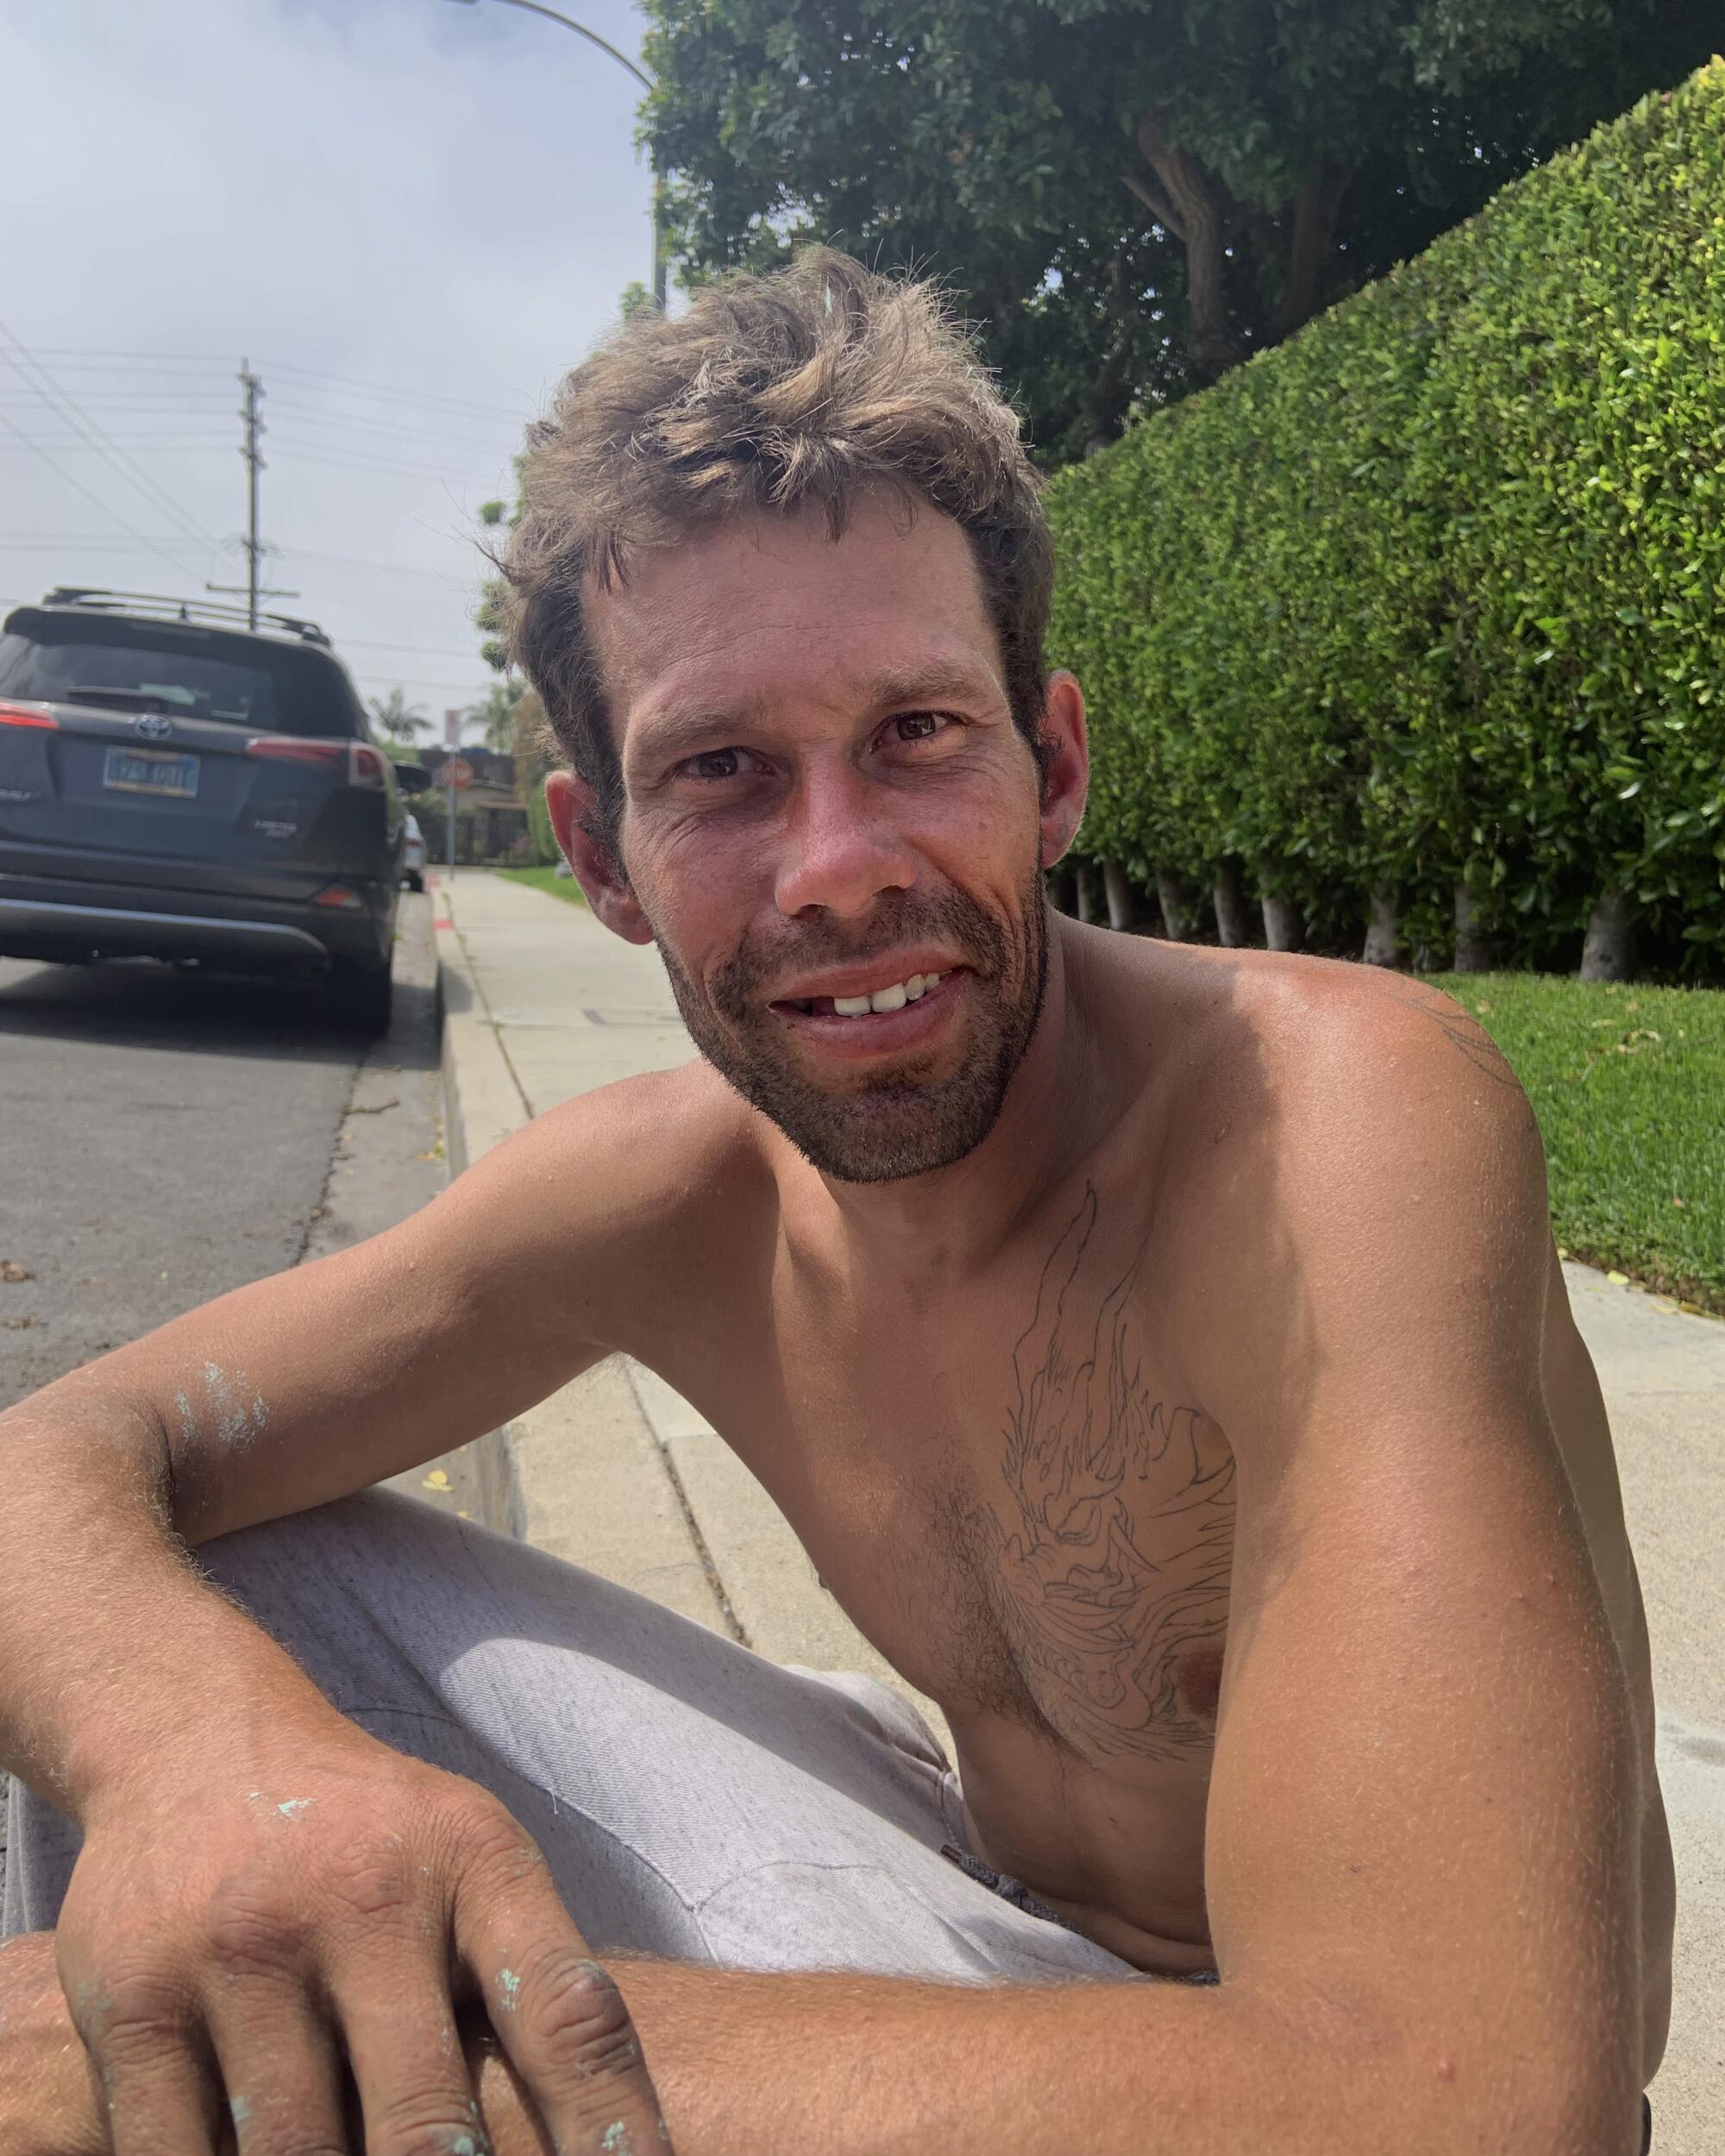 A vertical waist-up portrait of a shirtless man sitting on a curb on a sunny day, smiling and looking at the camera. 